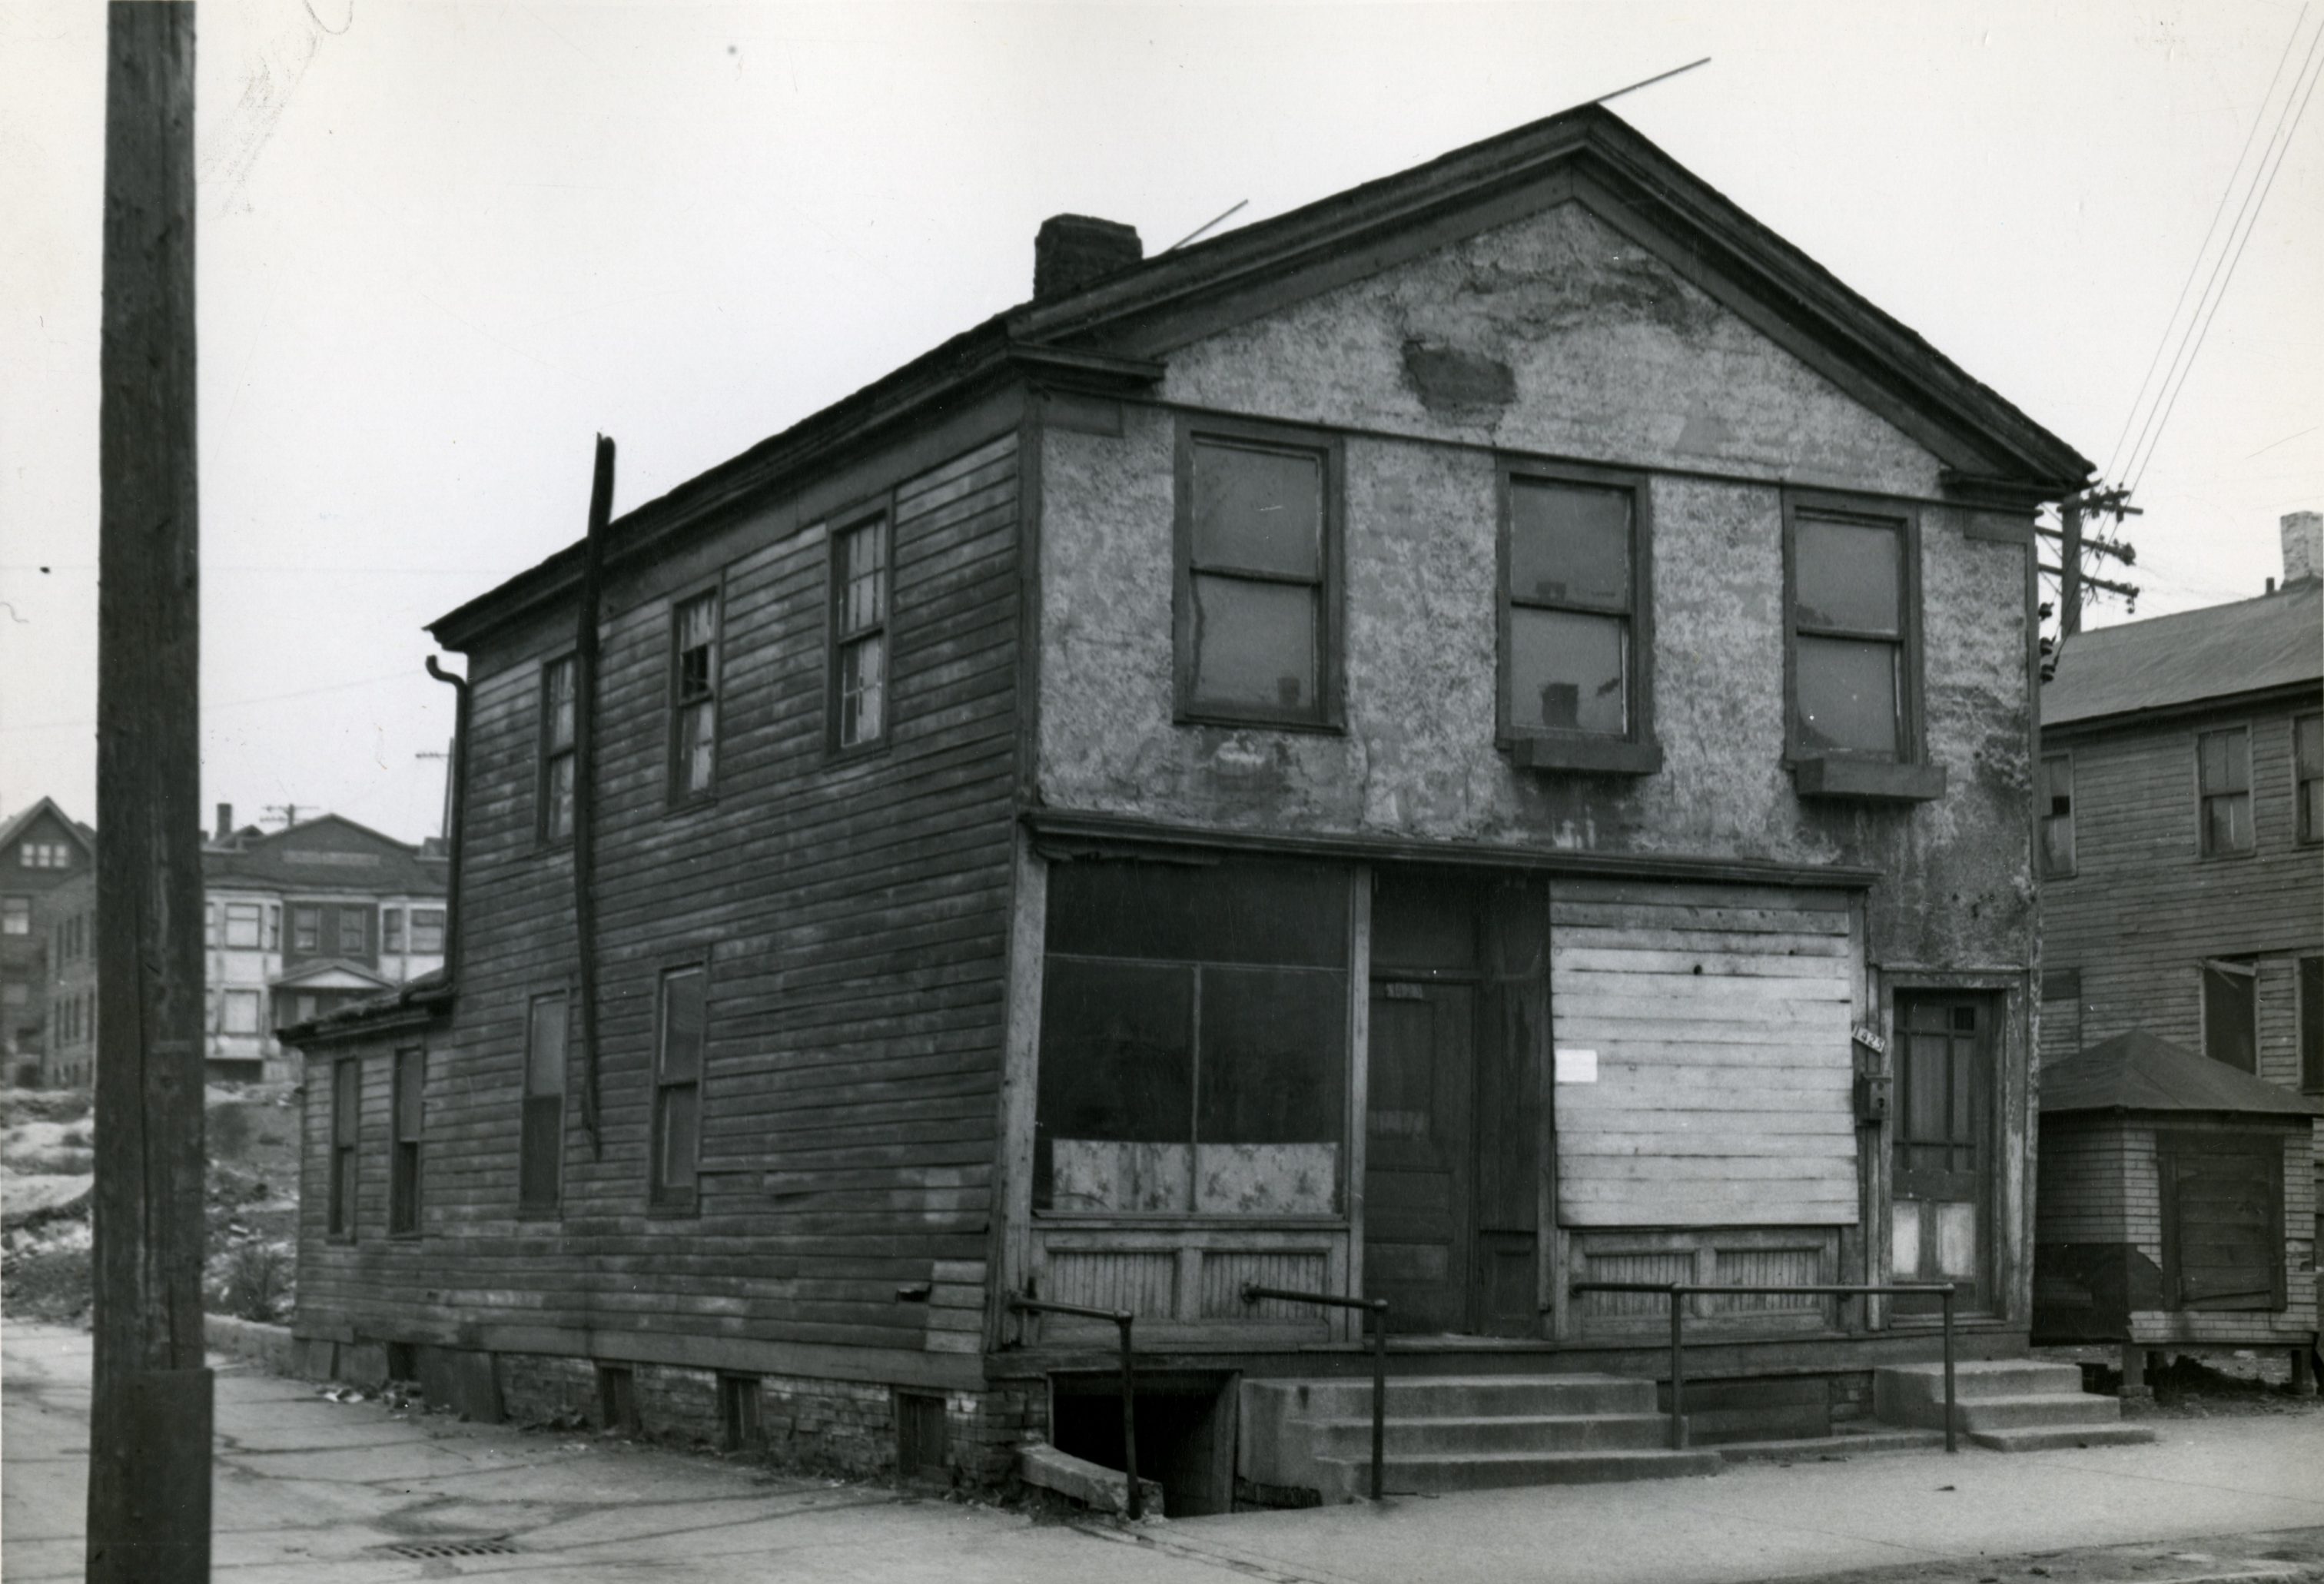 Building regulations, such as housing codes, categorized and quantified physical characteristics of structures in Milwaukee. This building, from the 1400 block of North 6th Street, was in such poor condition that it was razed soon after this photograph was taken in 1947.